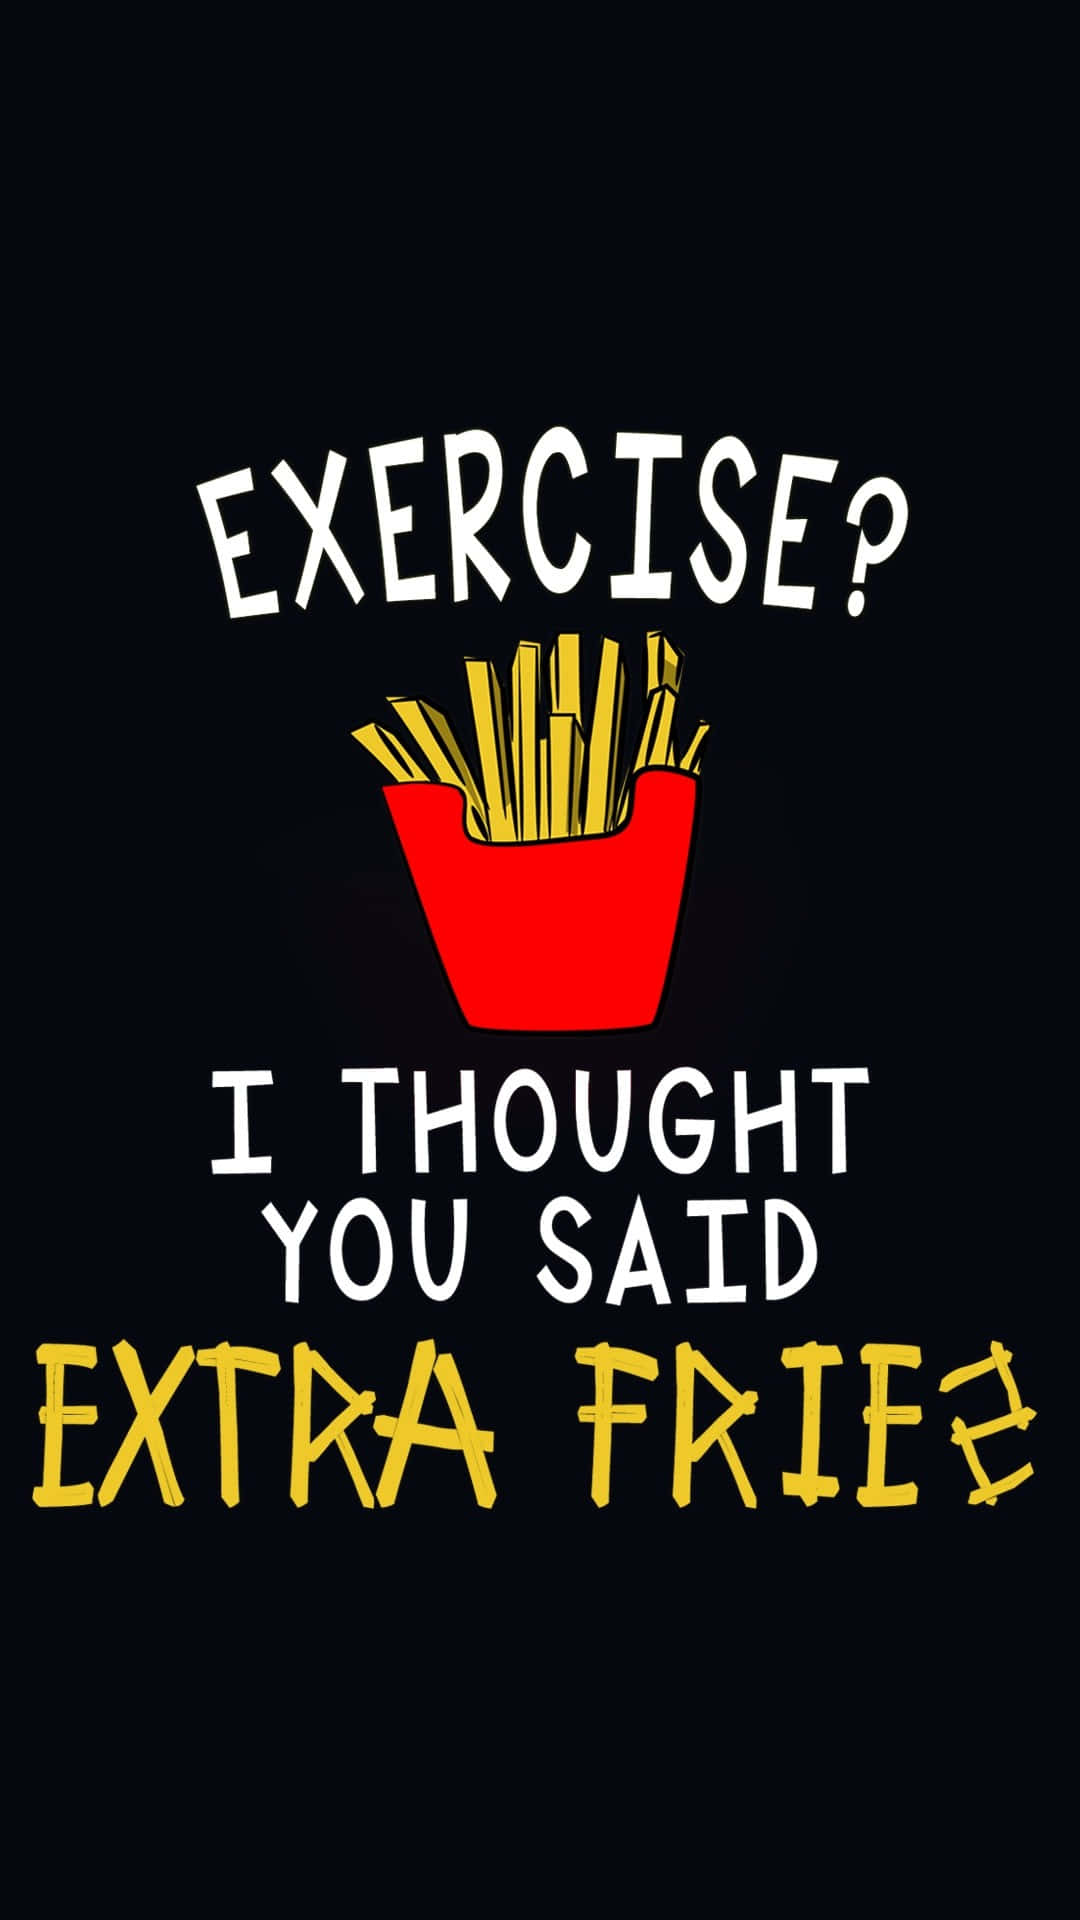 Box Of Fries Funny Adult Phone Wallpaper